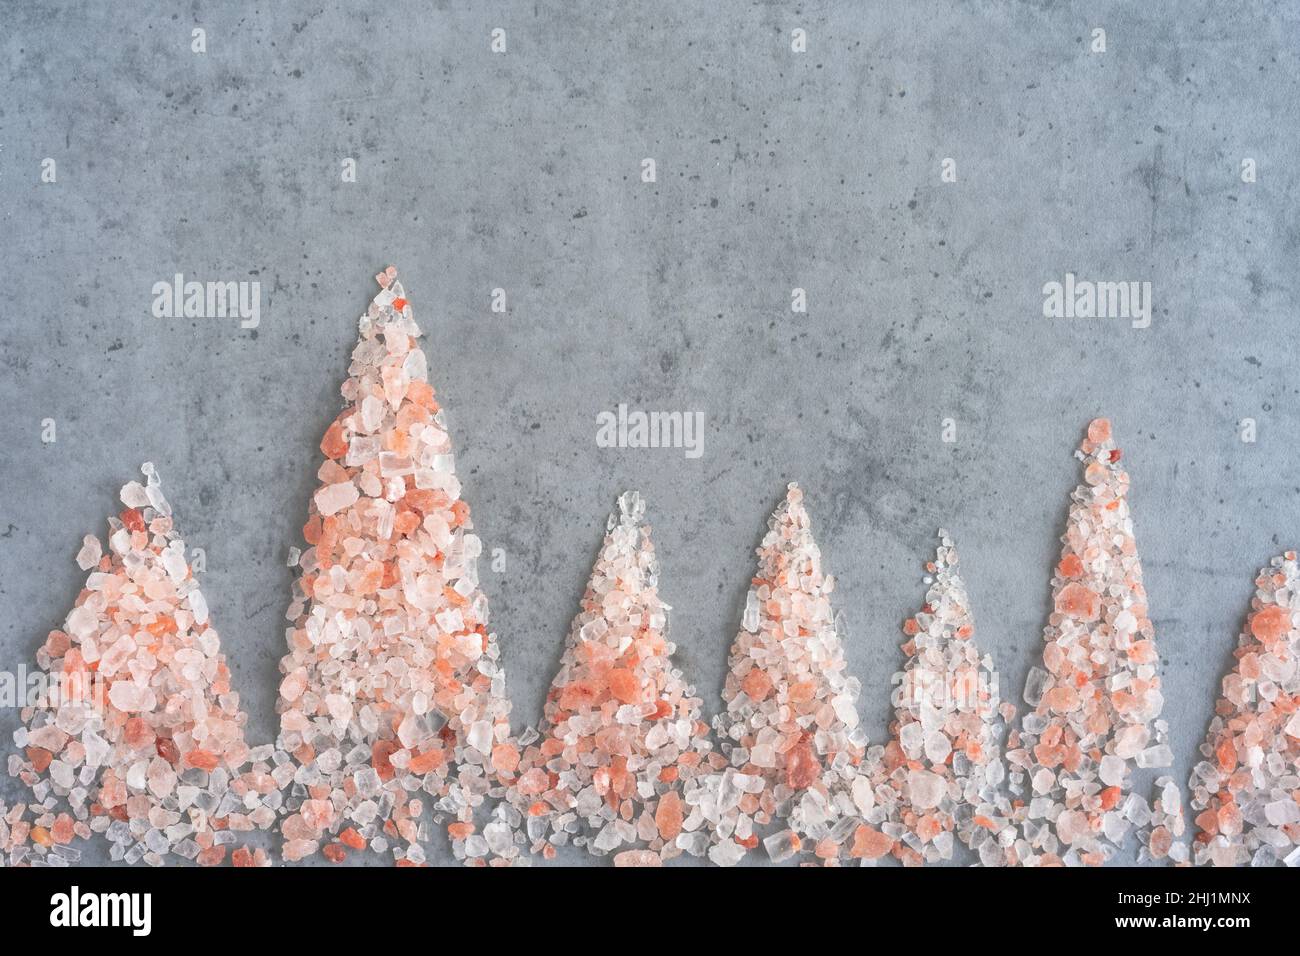 Himalayan salt in the form of mountains on a gray background Stock Photo